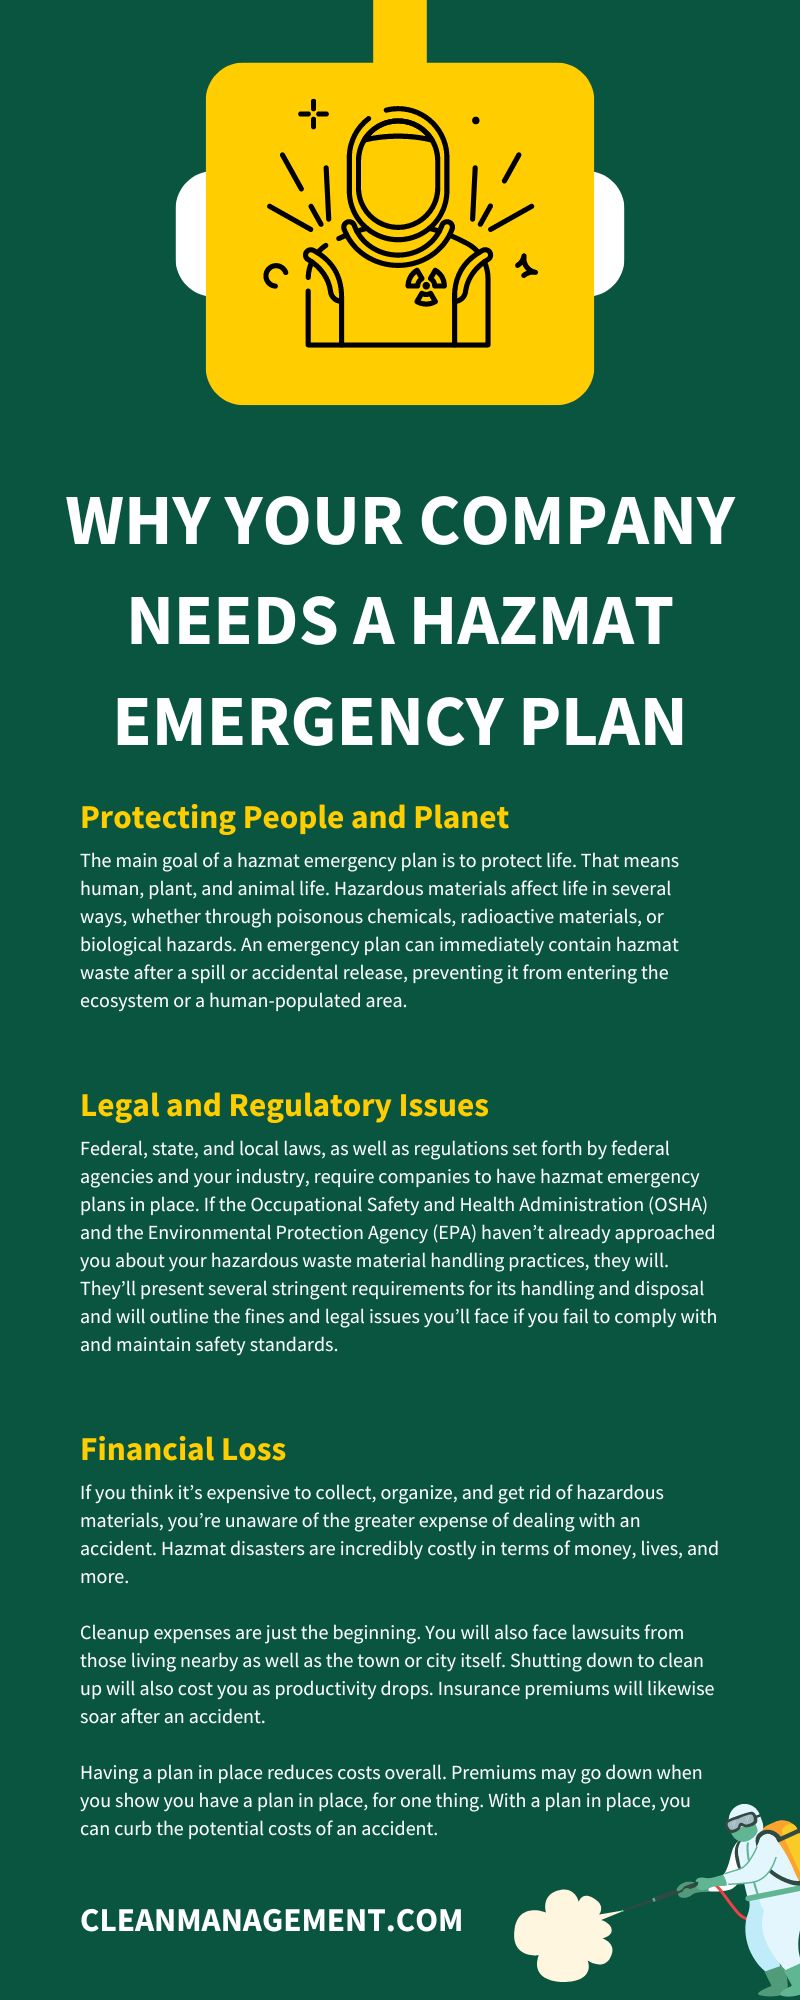 Why Your Company Needs a Hazmat Emergency Plan